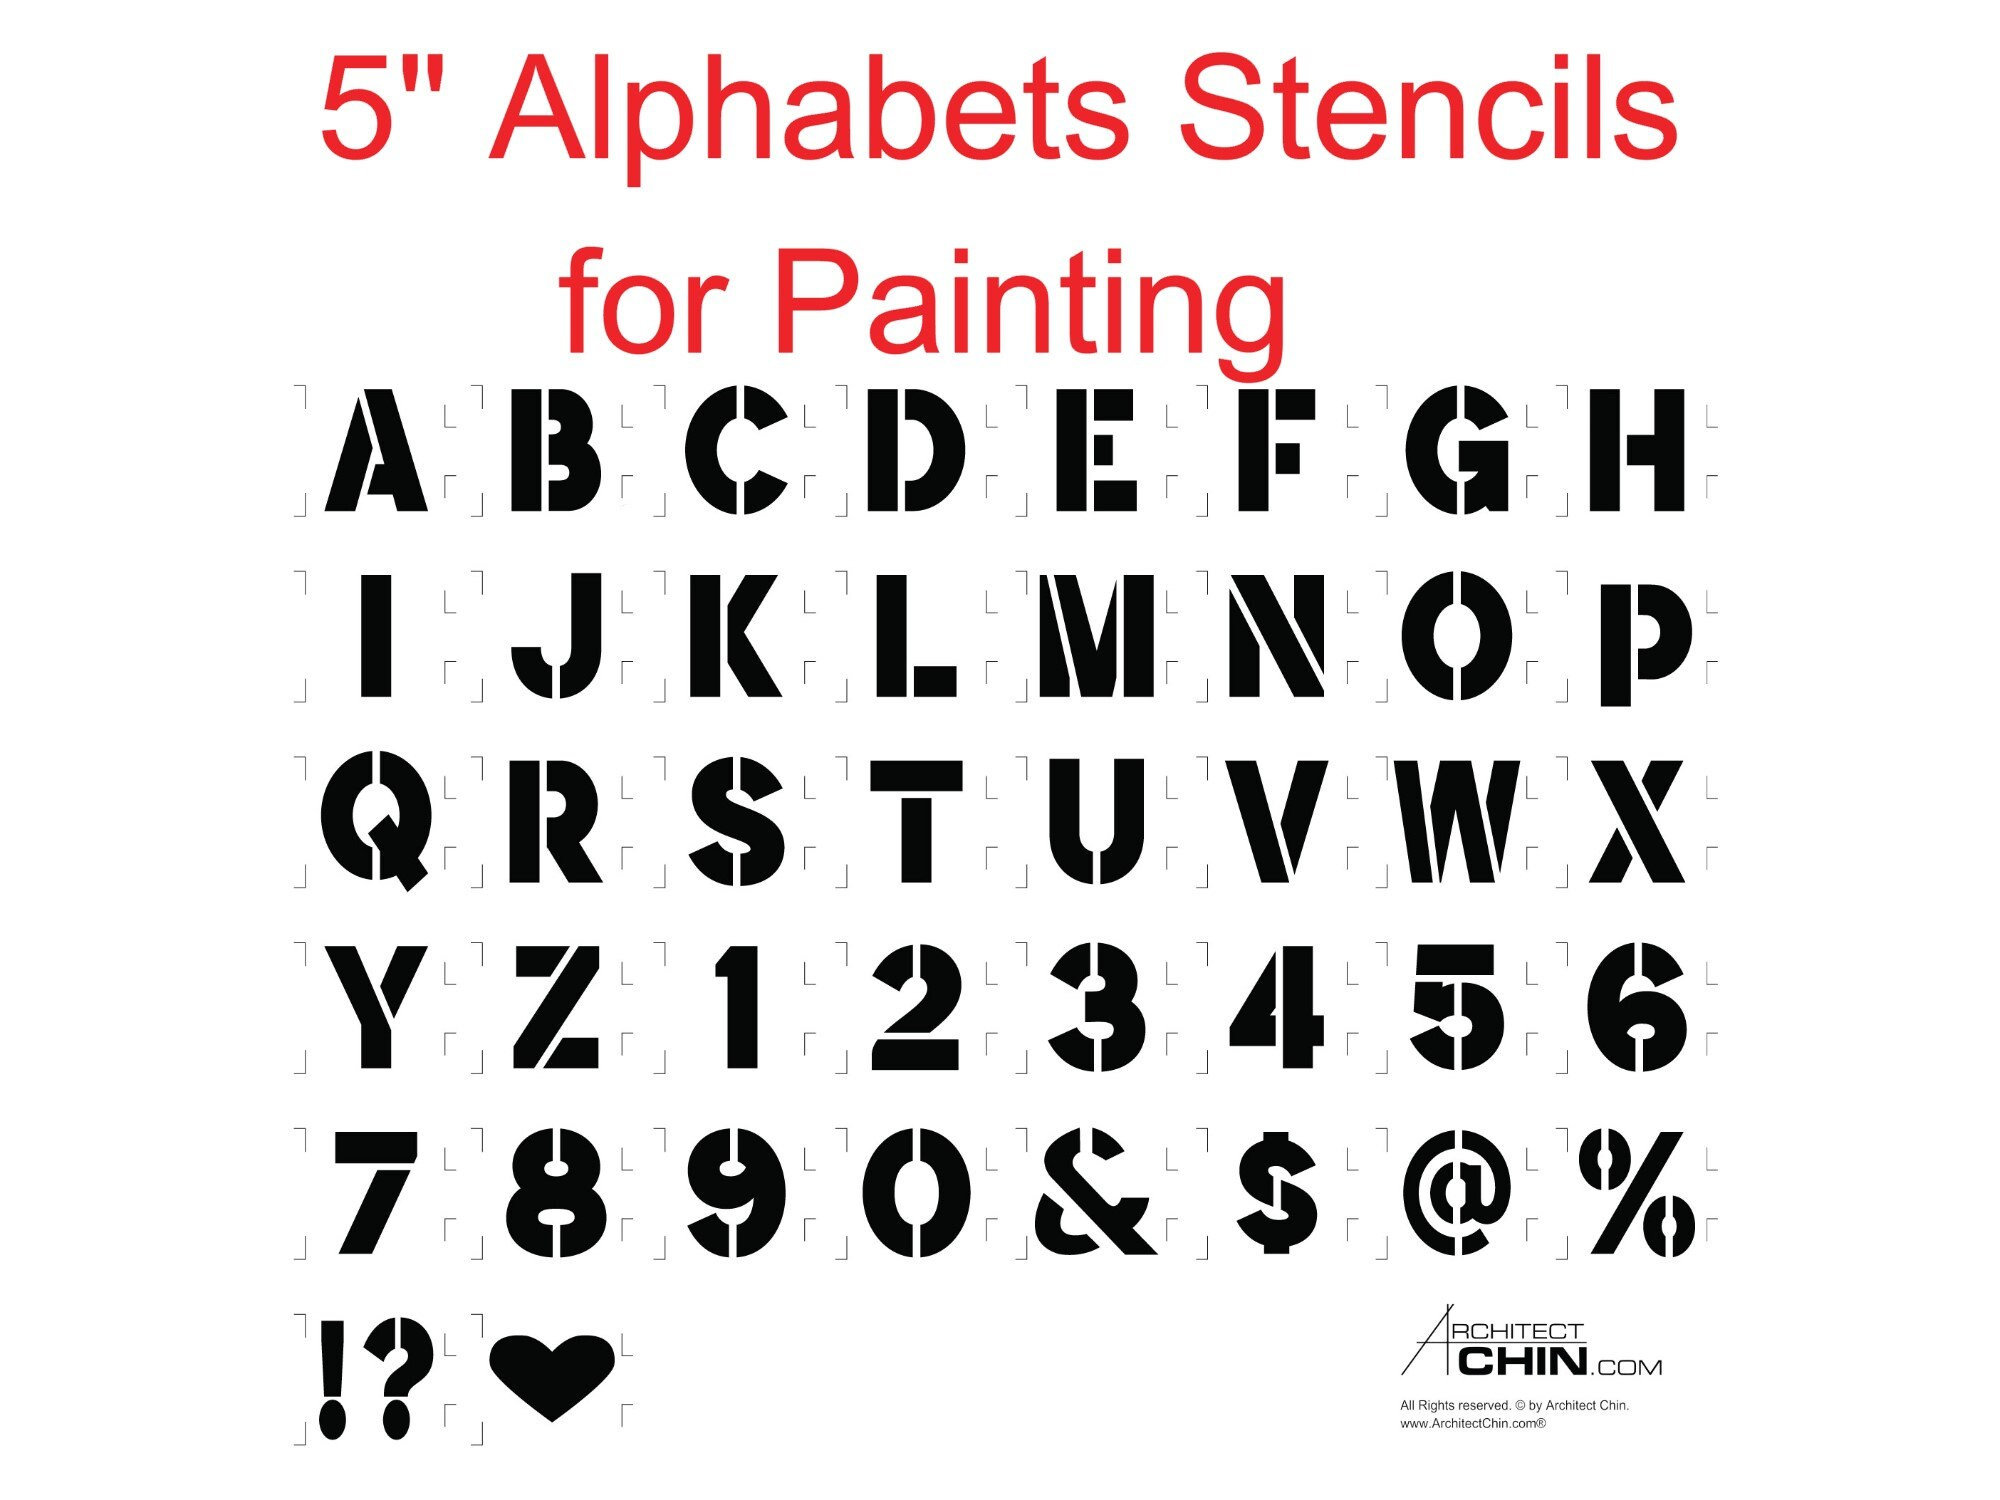 Alphabet Letter Stencils 4 Inch, 42 PCS Letter Number Symbol Templates  Interlocking Stencil Kit Art Craft Stencils for Paiting on Wood, Wall,  Glass